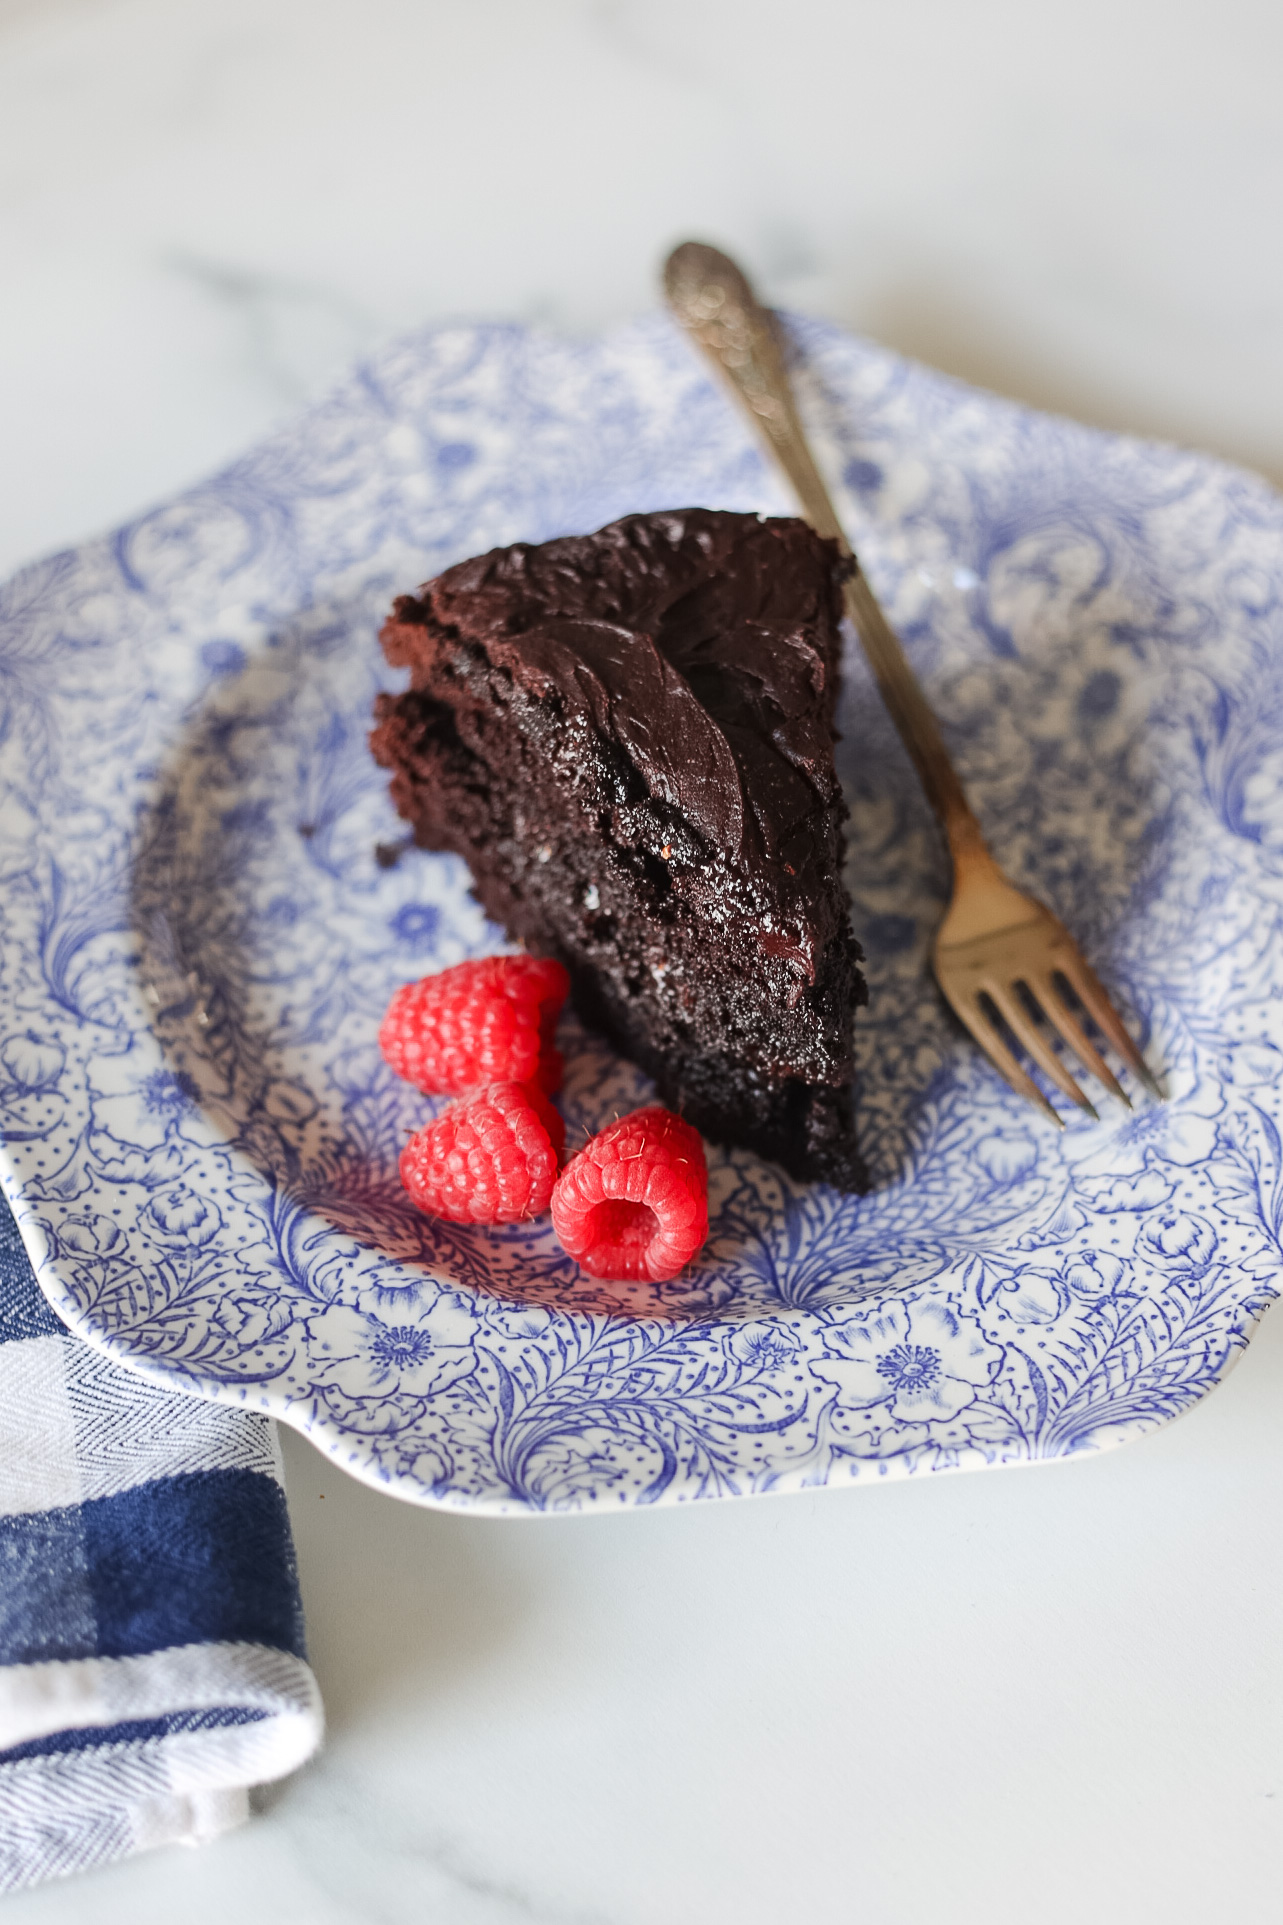 dark chocolate cake slice on blue and white floral plate with raspberries on plate